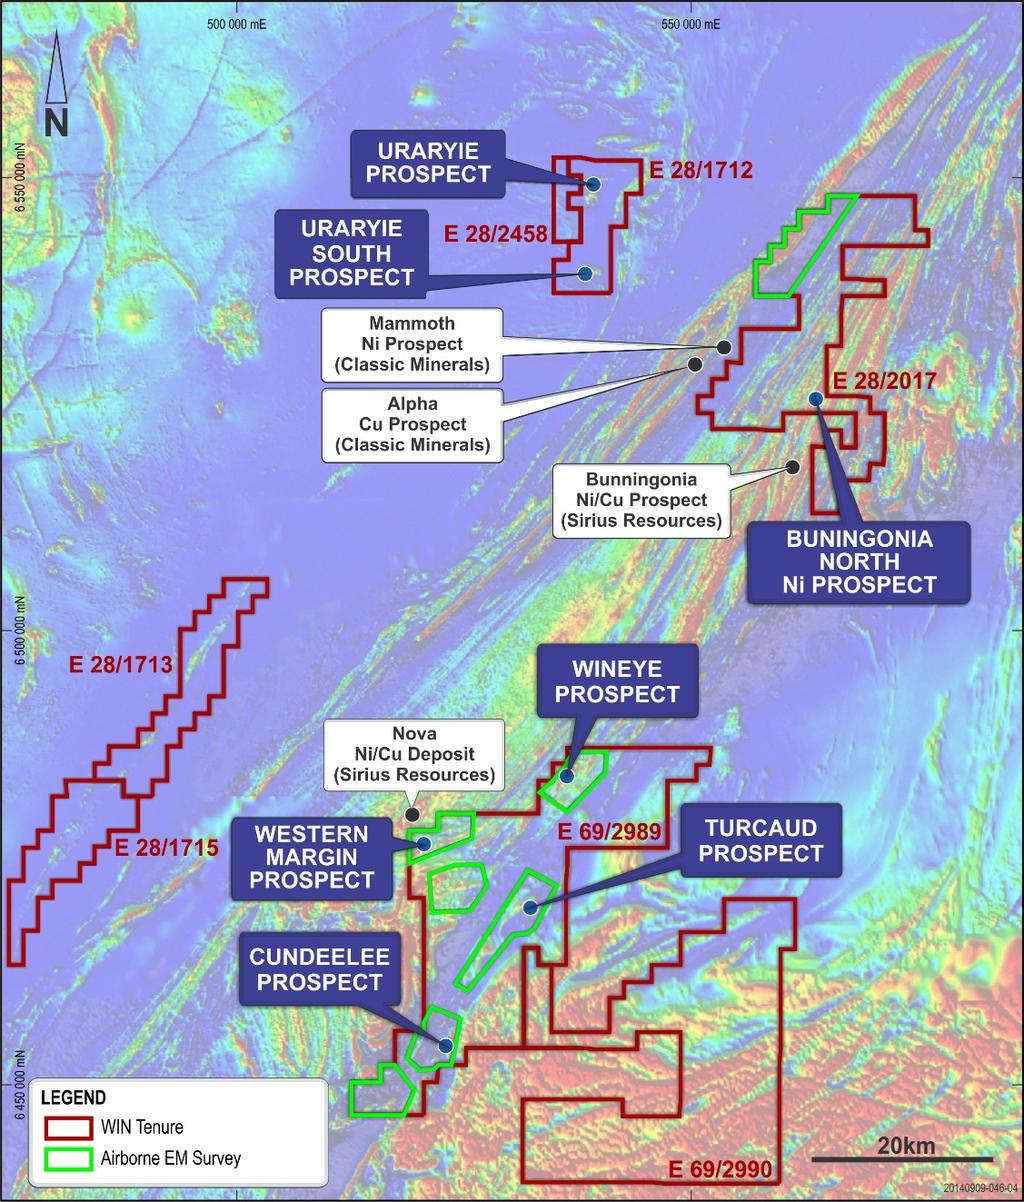 Fraser Range North Project 1,900km 2 of tenements within the Nova Ni-Cu belt and the Tropicana gold belt E69/2989 contiguous with Sirius Nova Ni/Cu deposit (2km from Nova) contains WMA1 (Western